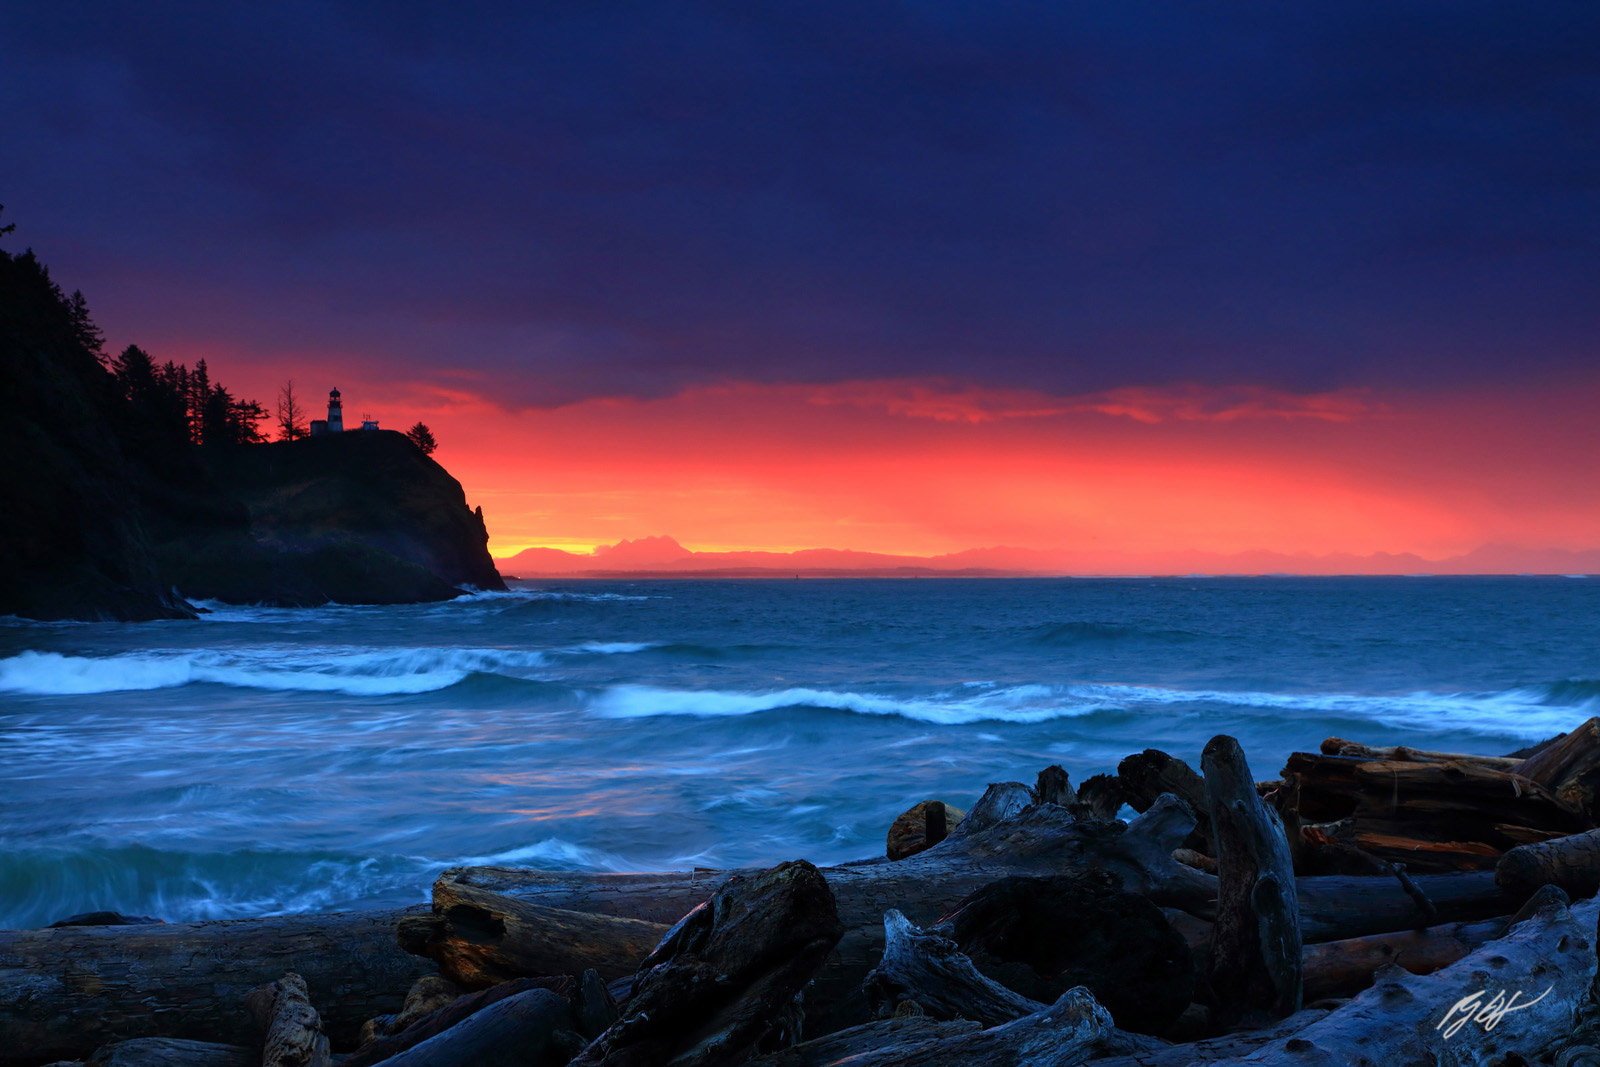 Sunrise with the Cape Disappointment Lighthouse in Cape Disappointment State Park in Washington